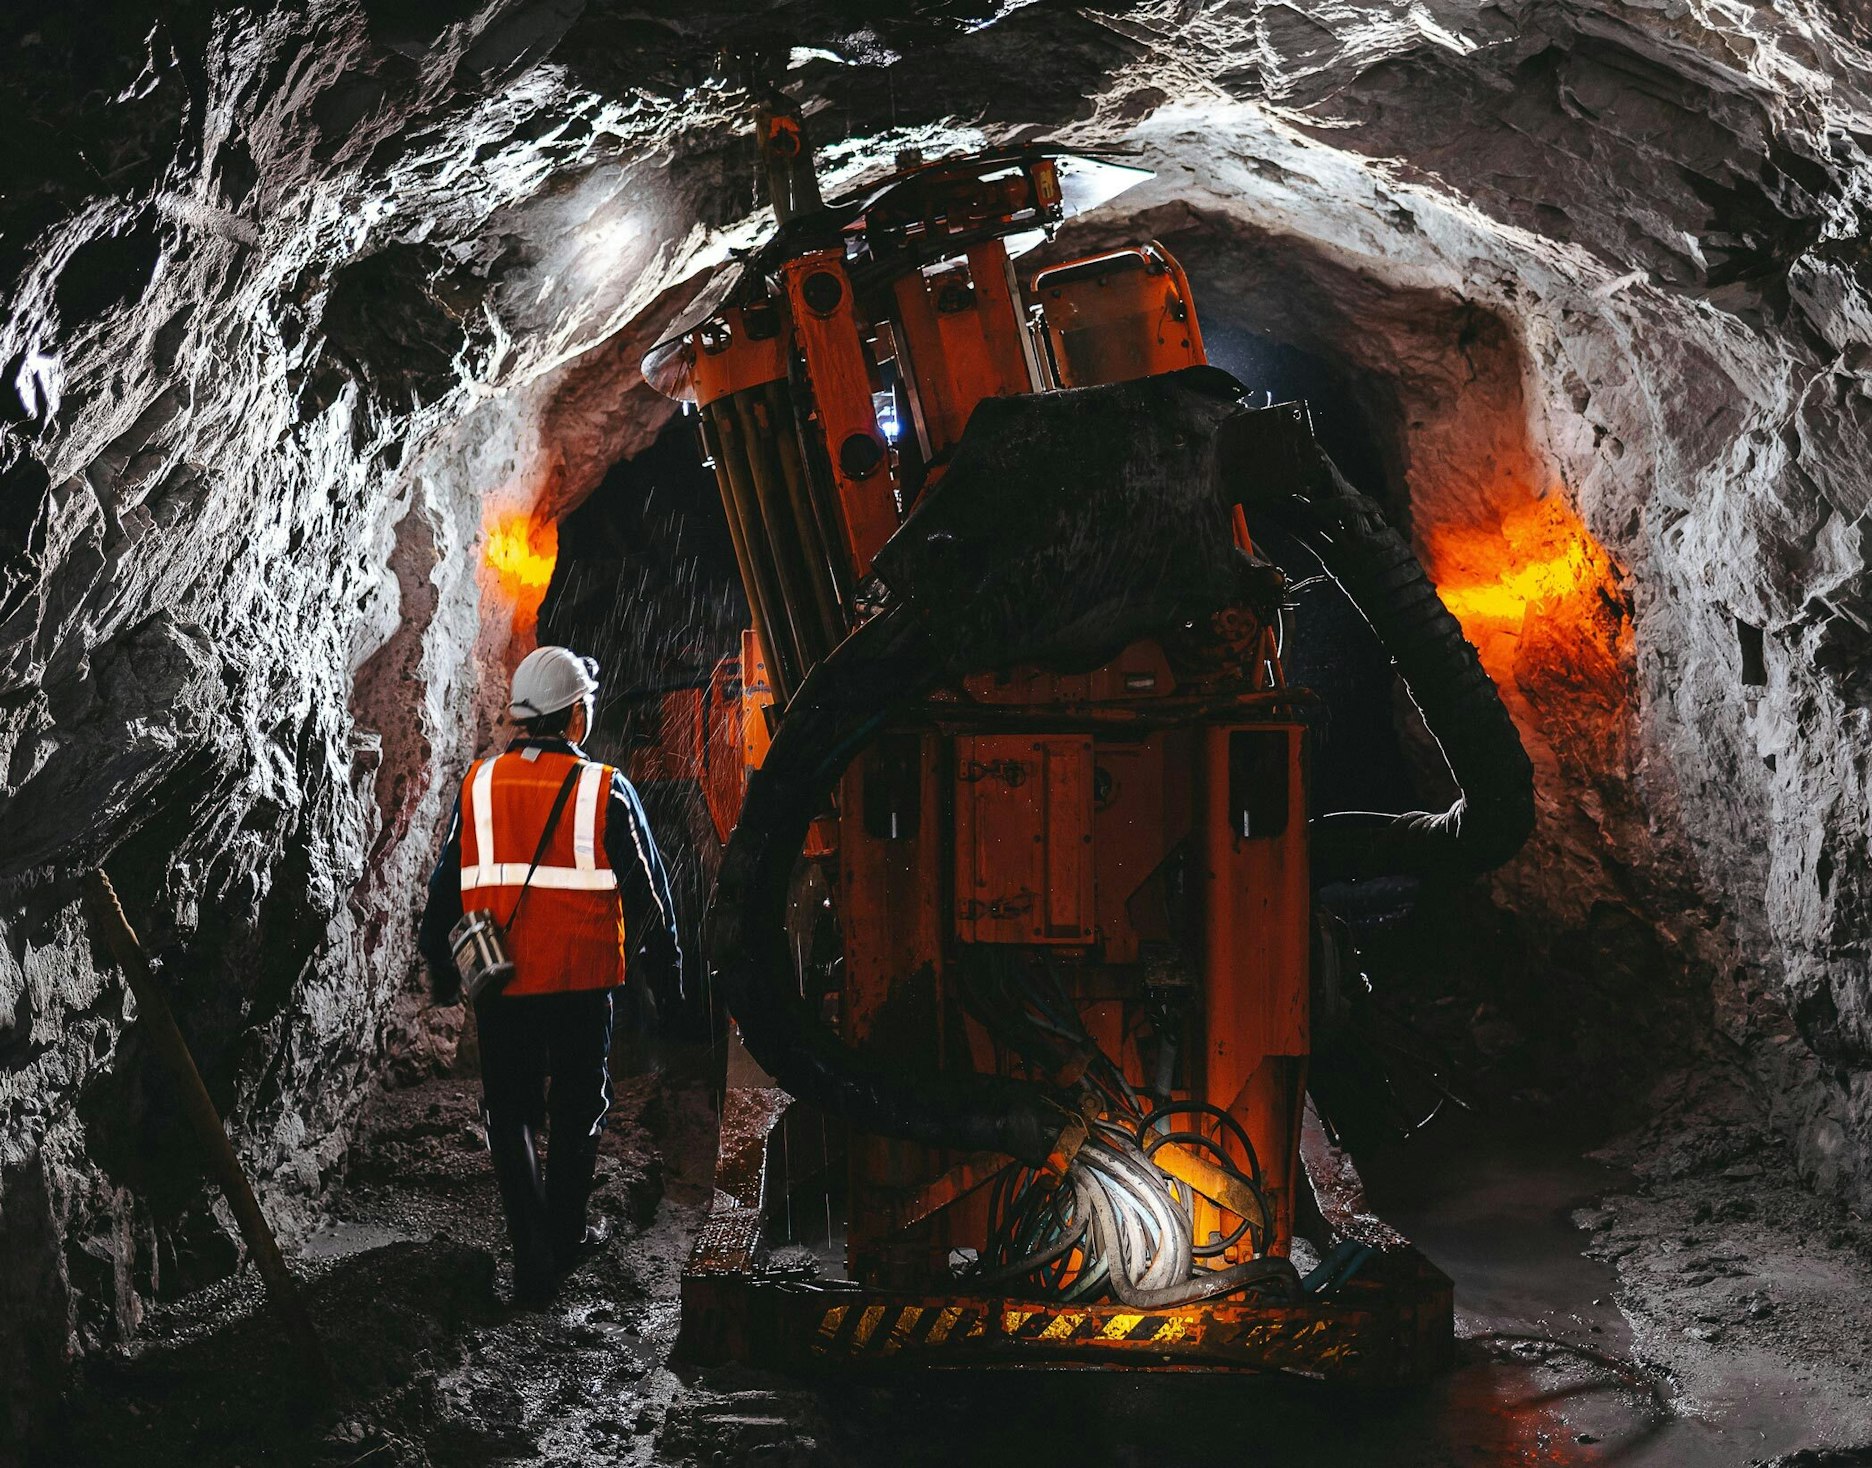 Mining image with worker